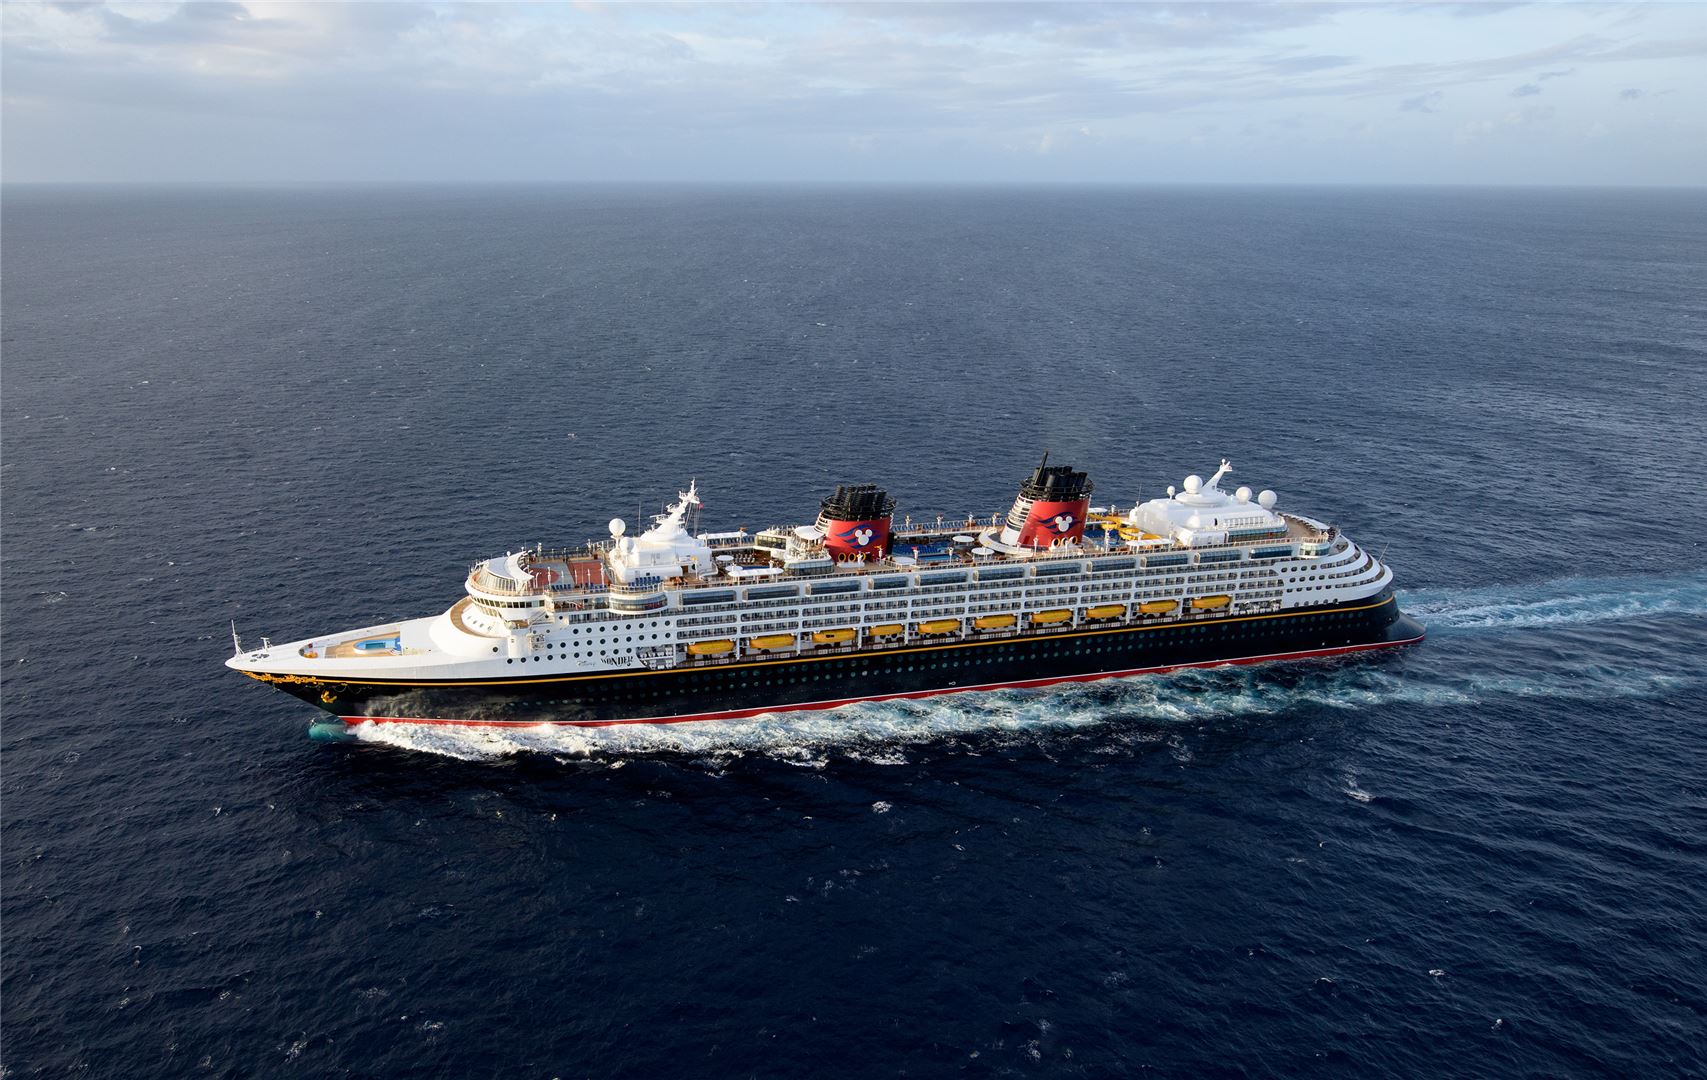 Disney Cruise Line Makes Its First-Ever Appearance At Cruise 360